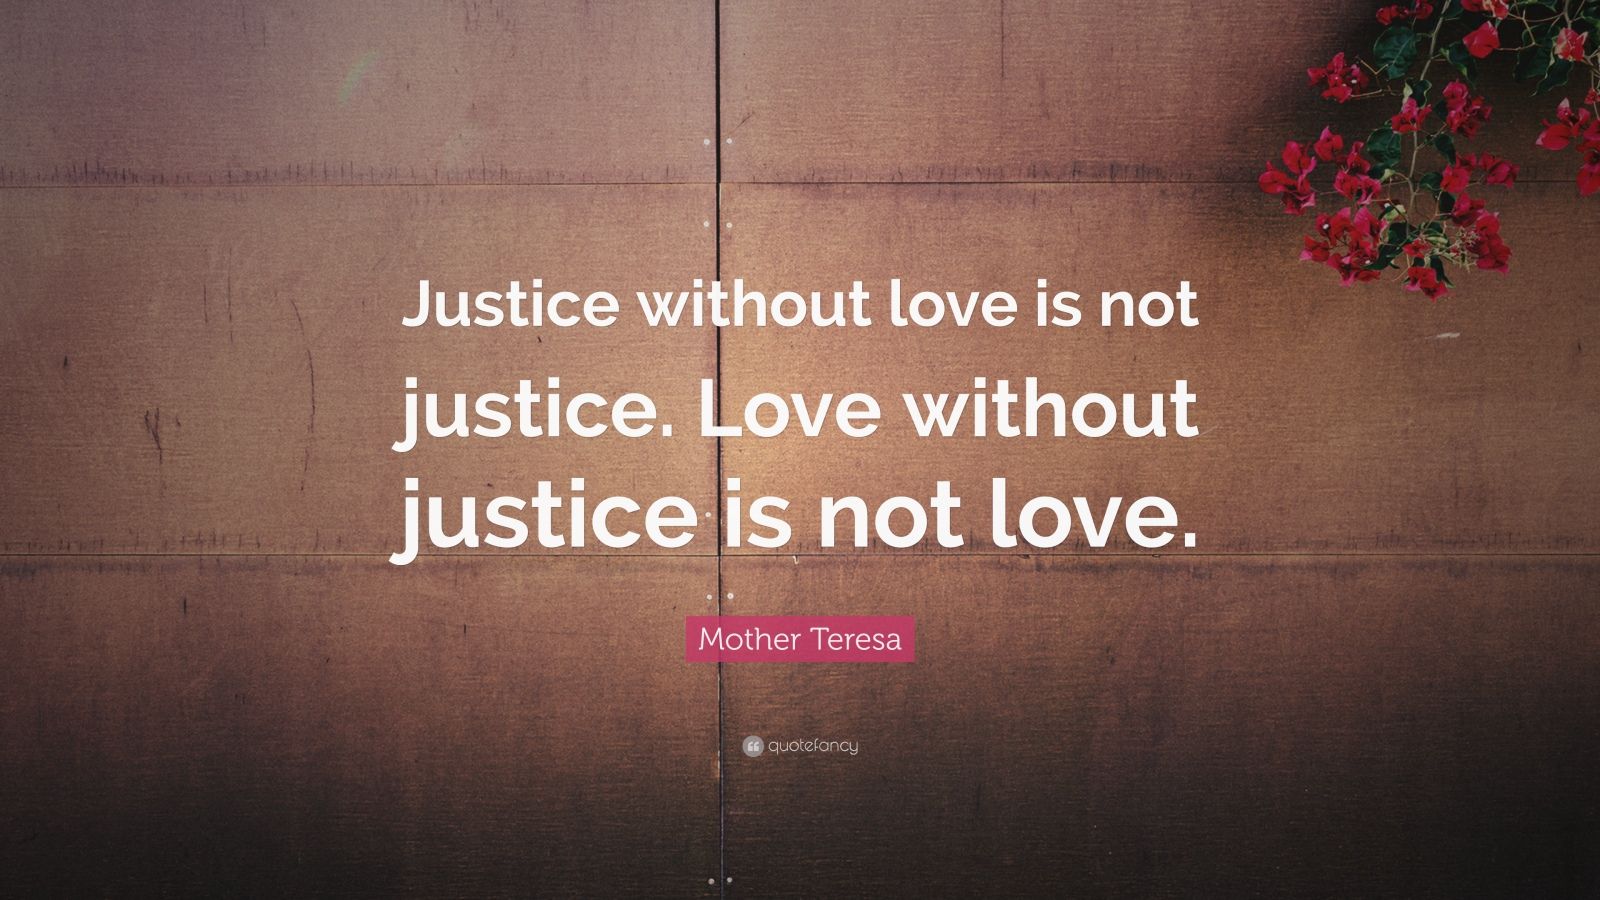 Mother Teresa Quote: “Justice without love is not justice. Love without